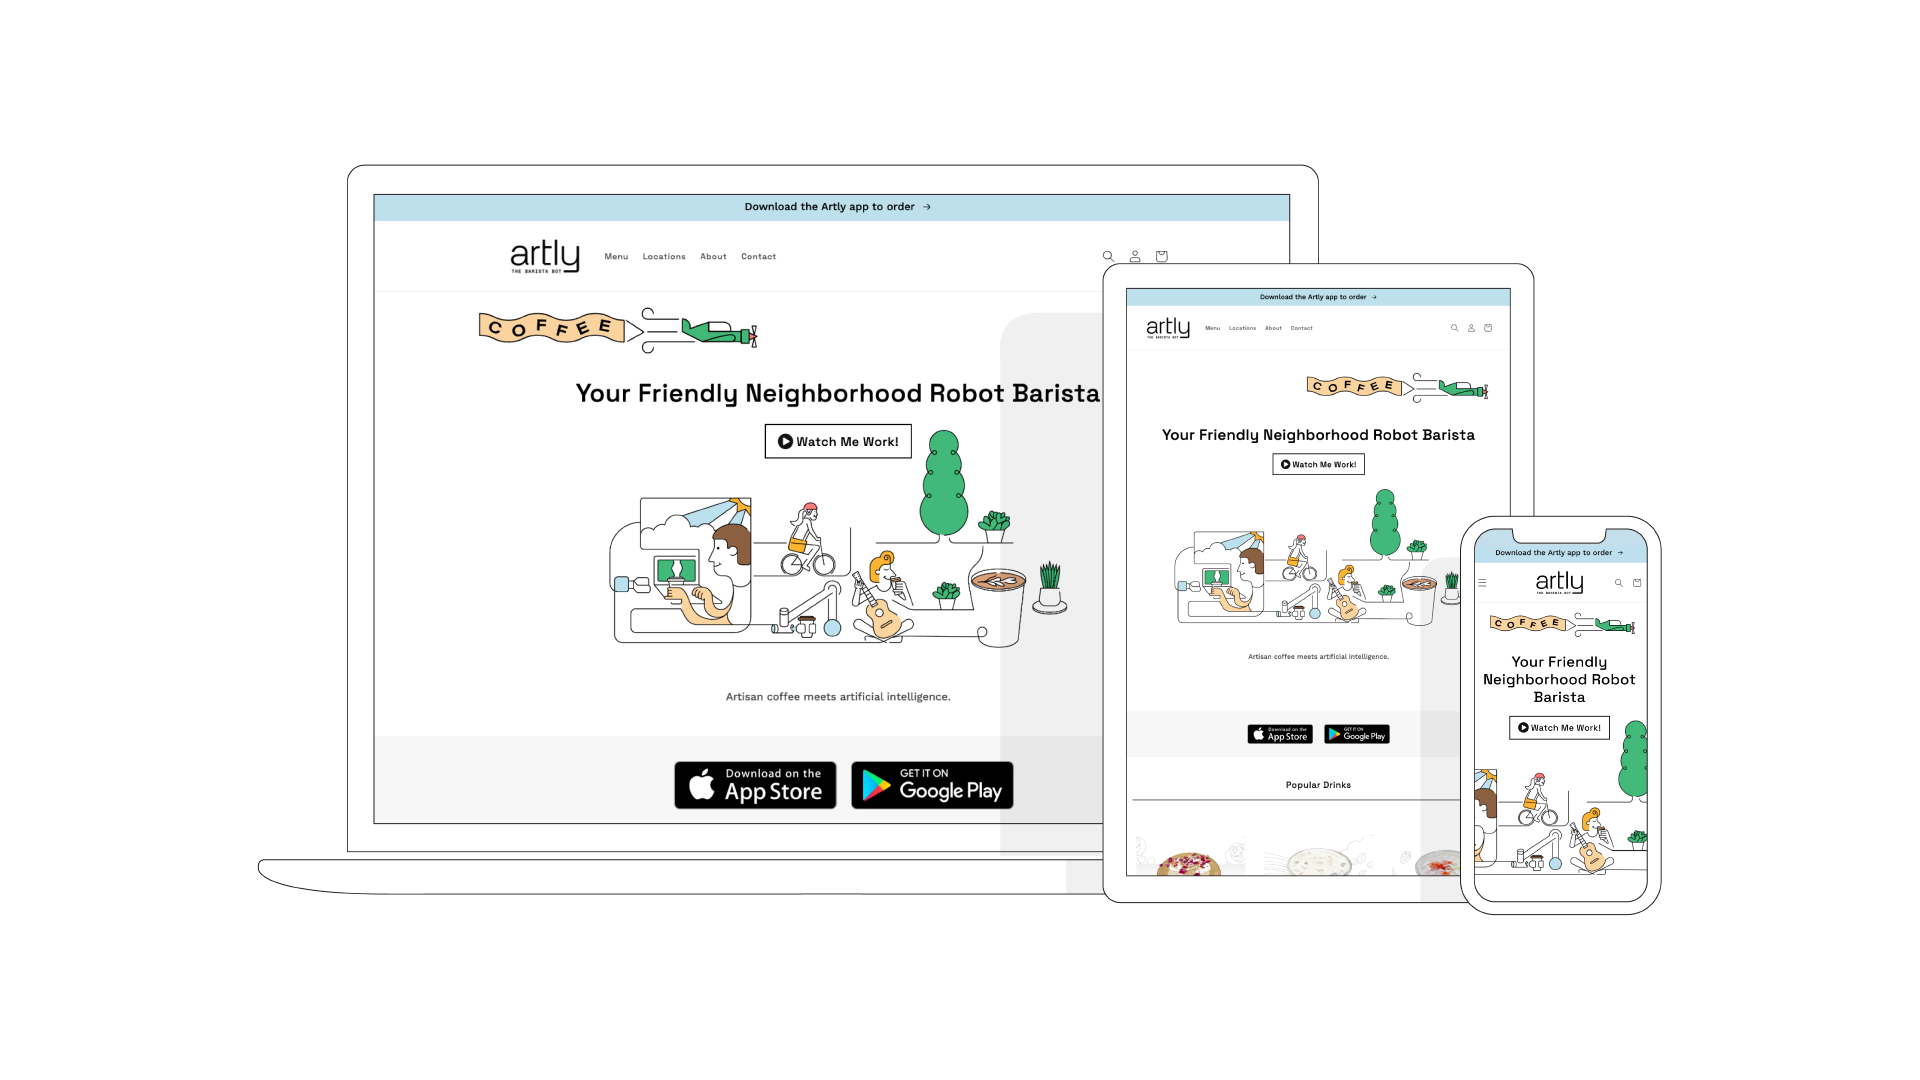 We mocked up what the website would look like on a desktop, tablet, and smartphone. Artly’s signature illustrations are featured on each page front and center.